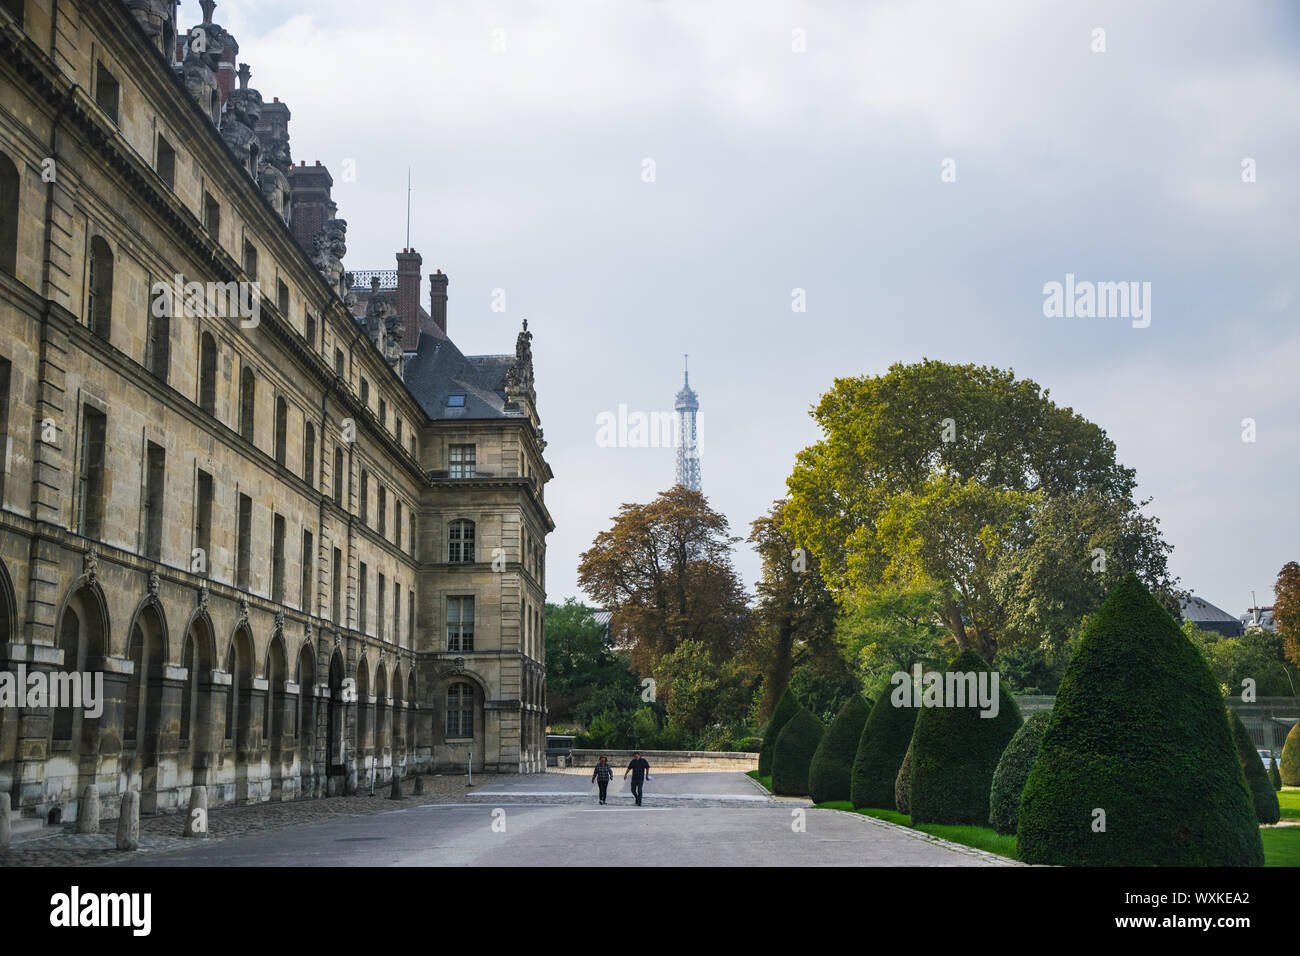 PARIS, FRANCE - 02 OCTOBER 2018: Military museum in Paris. One of the biggest military museums in the world Stock Photo